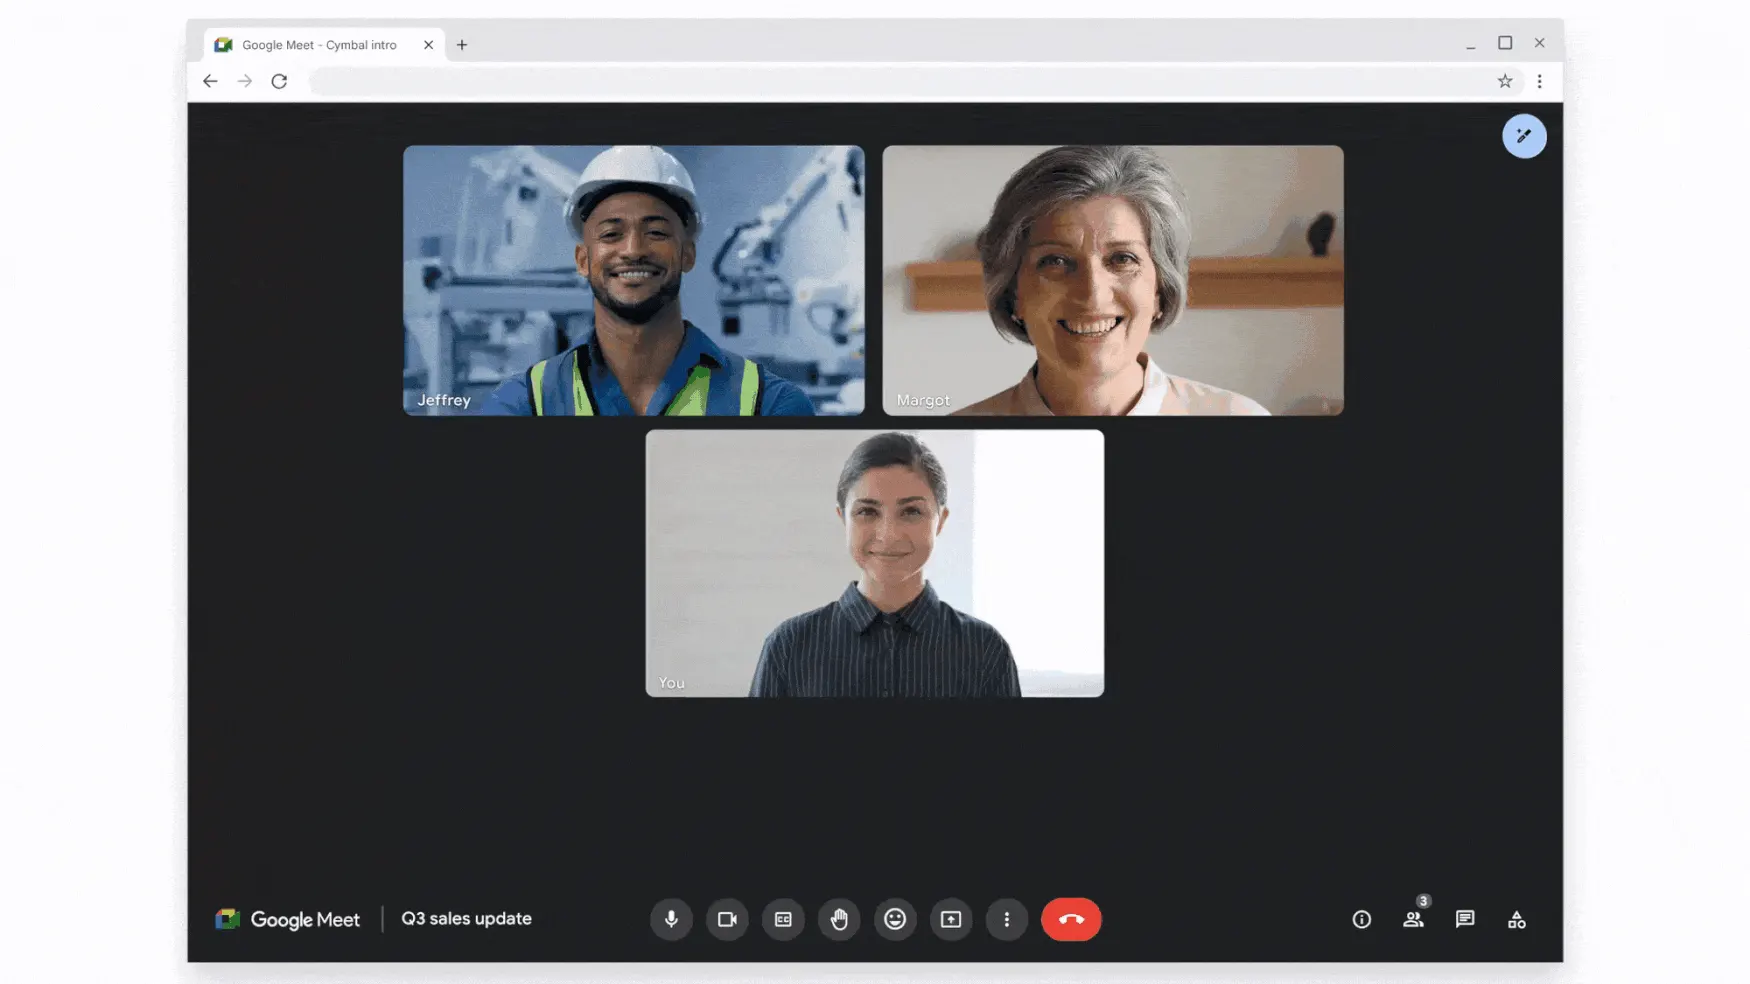 Google Duet AI in Google Meet, showing a feature that can catch users up on what they missed in a meeting if they join it late.